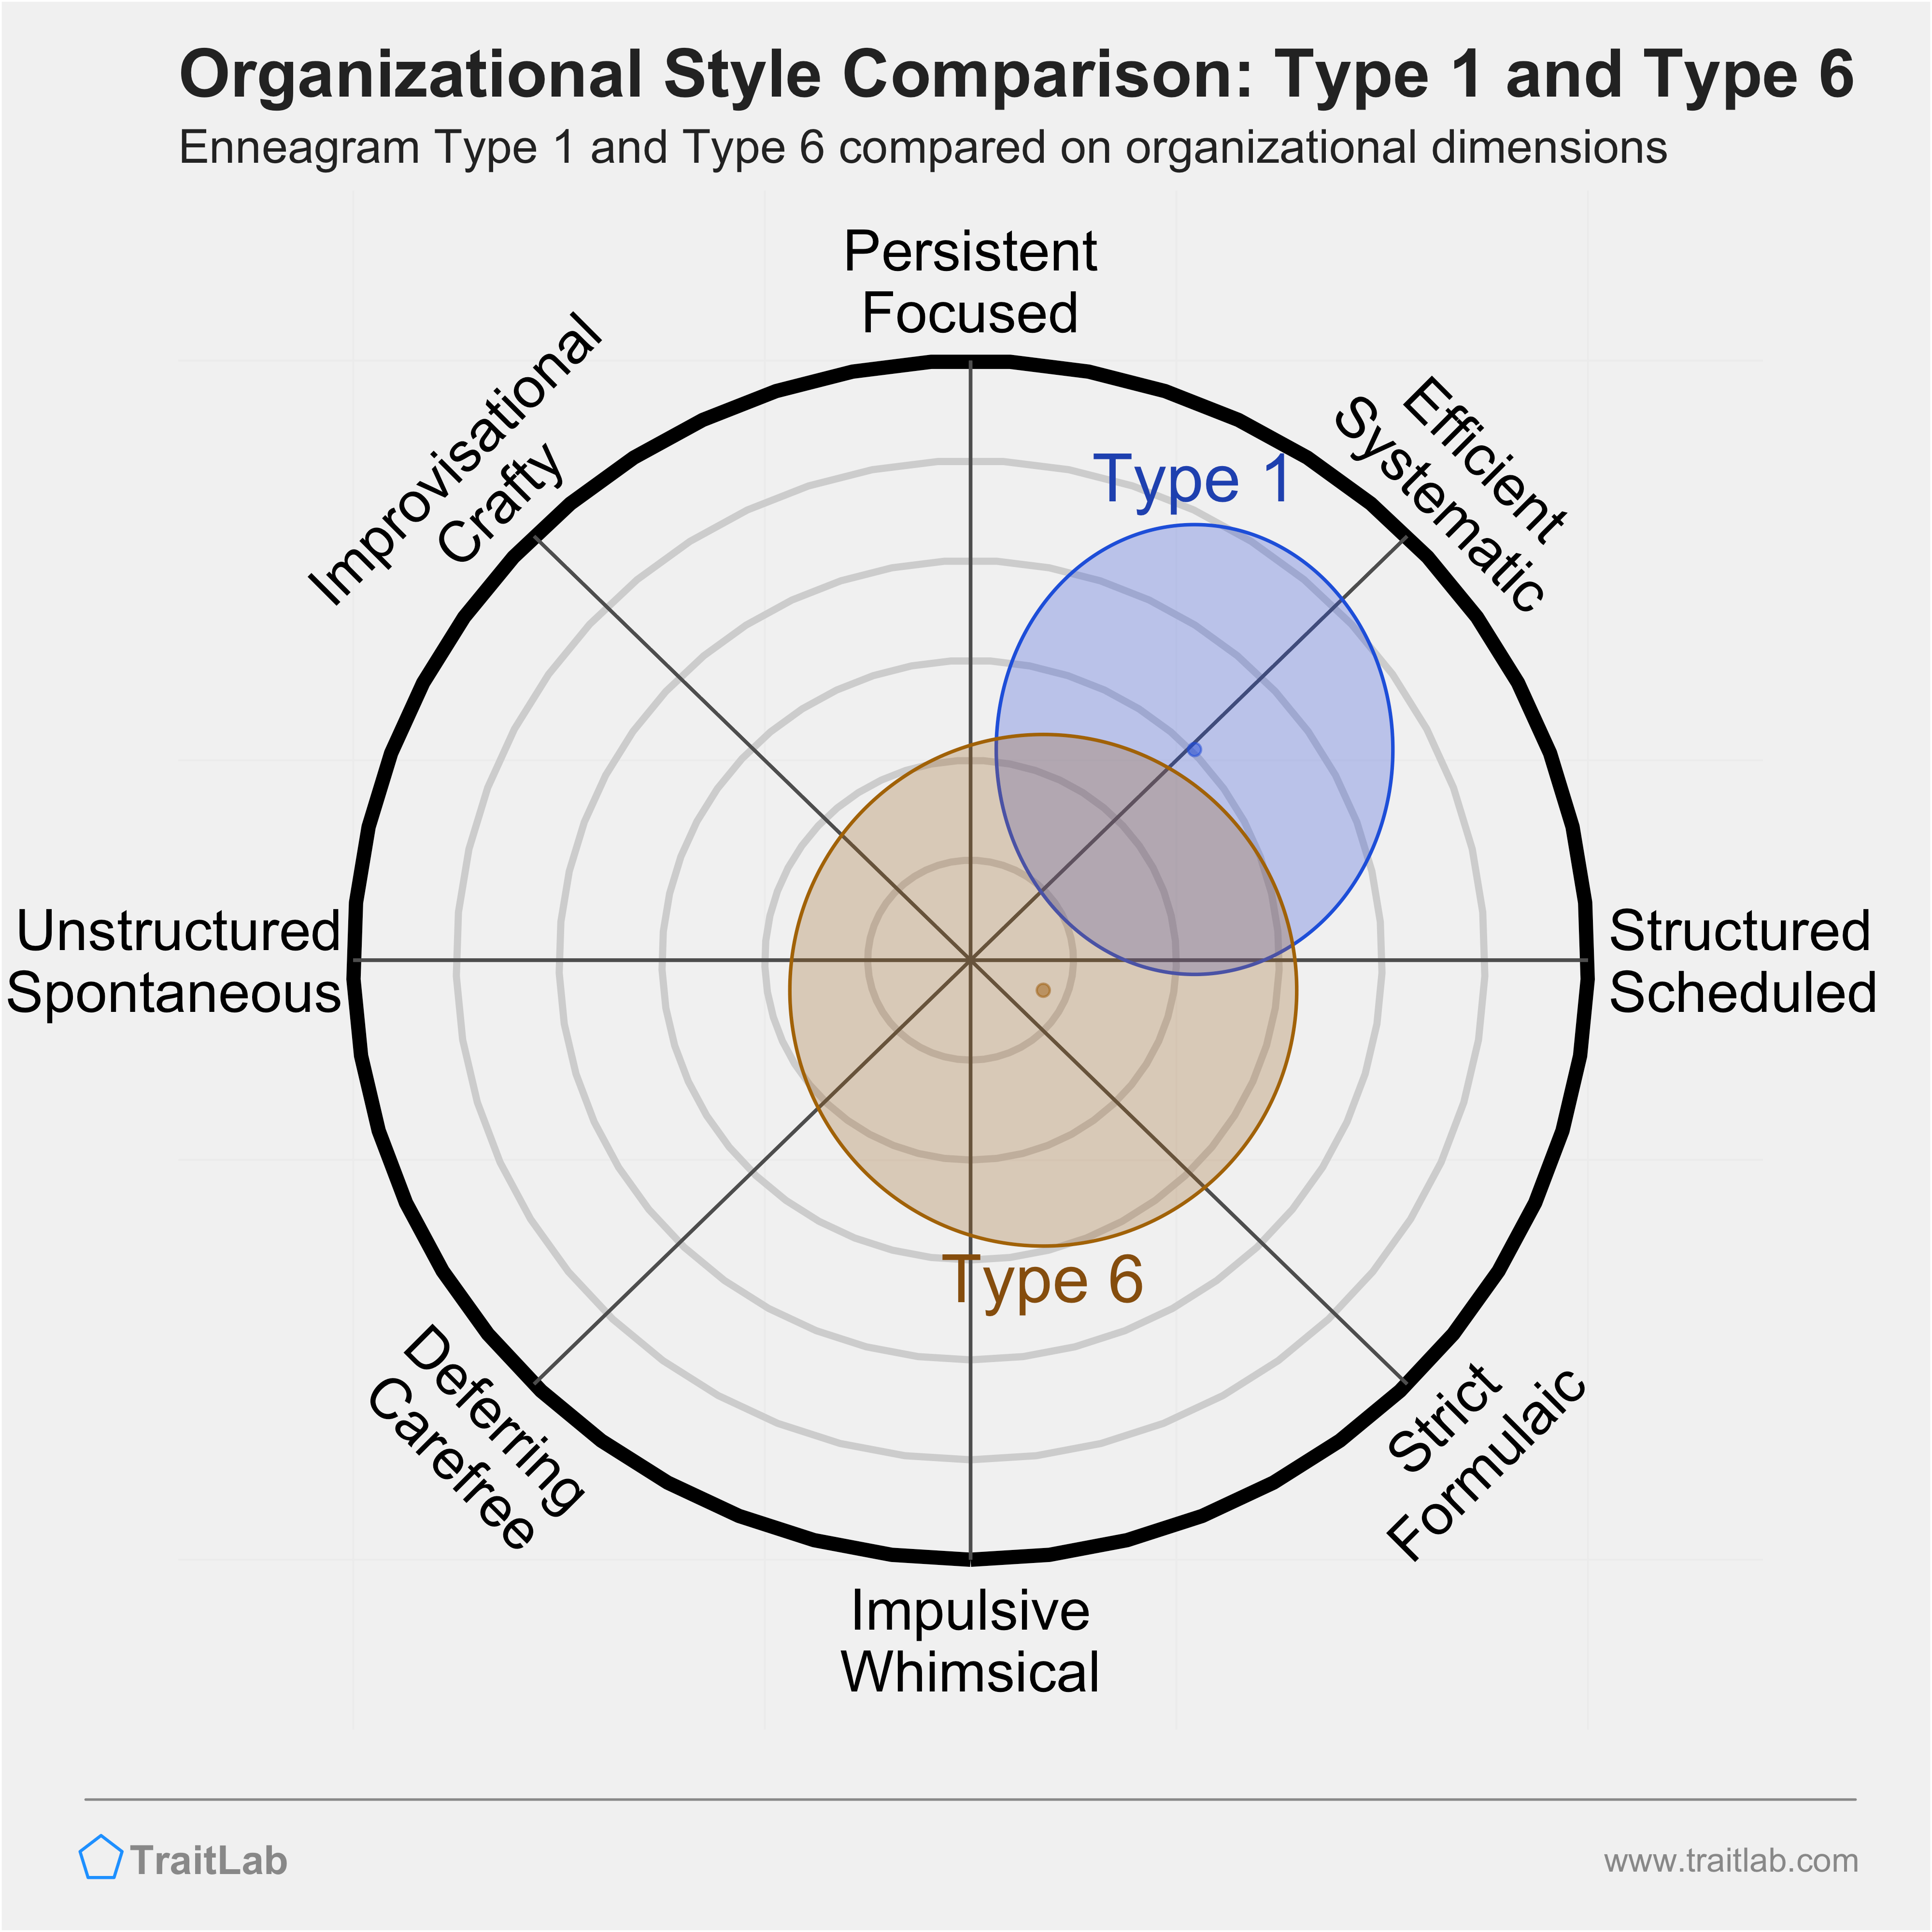 Type 1 and Type 6 comparison across organizational dimensions